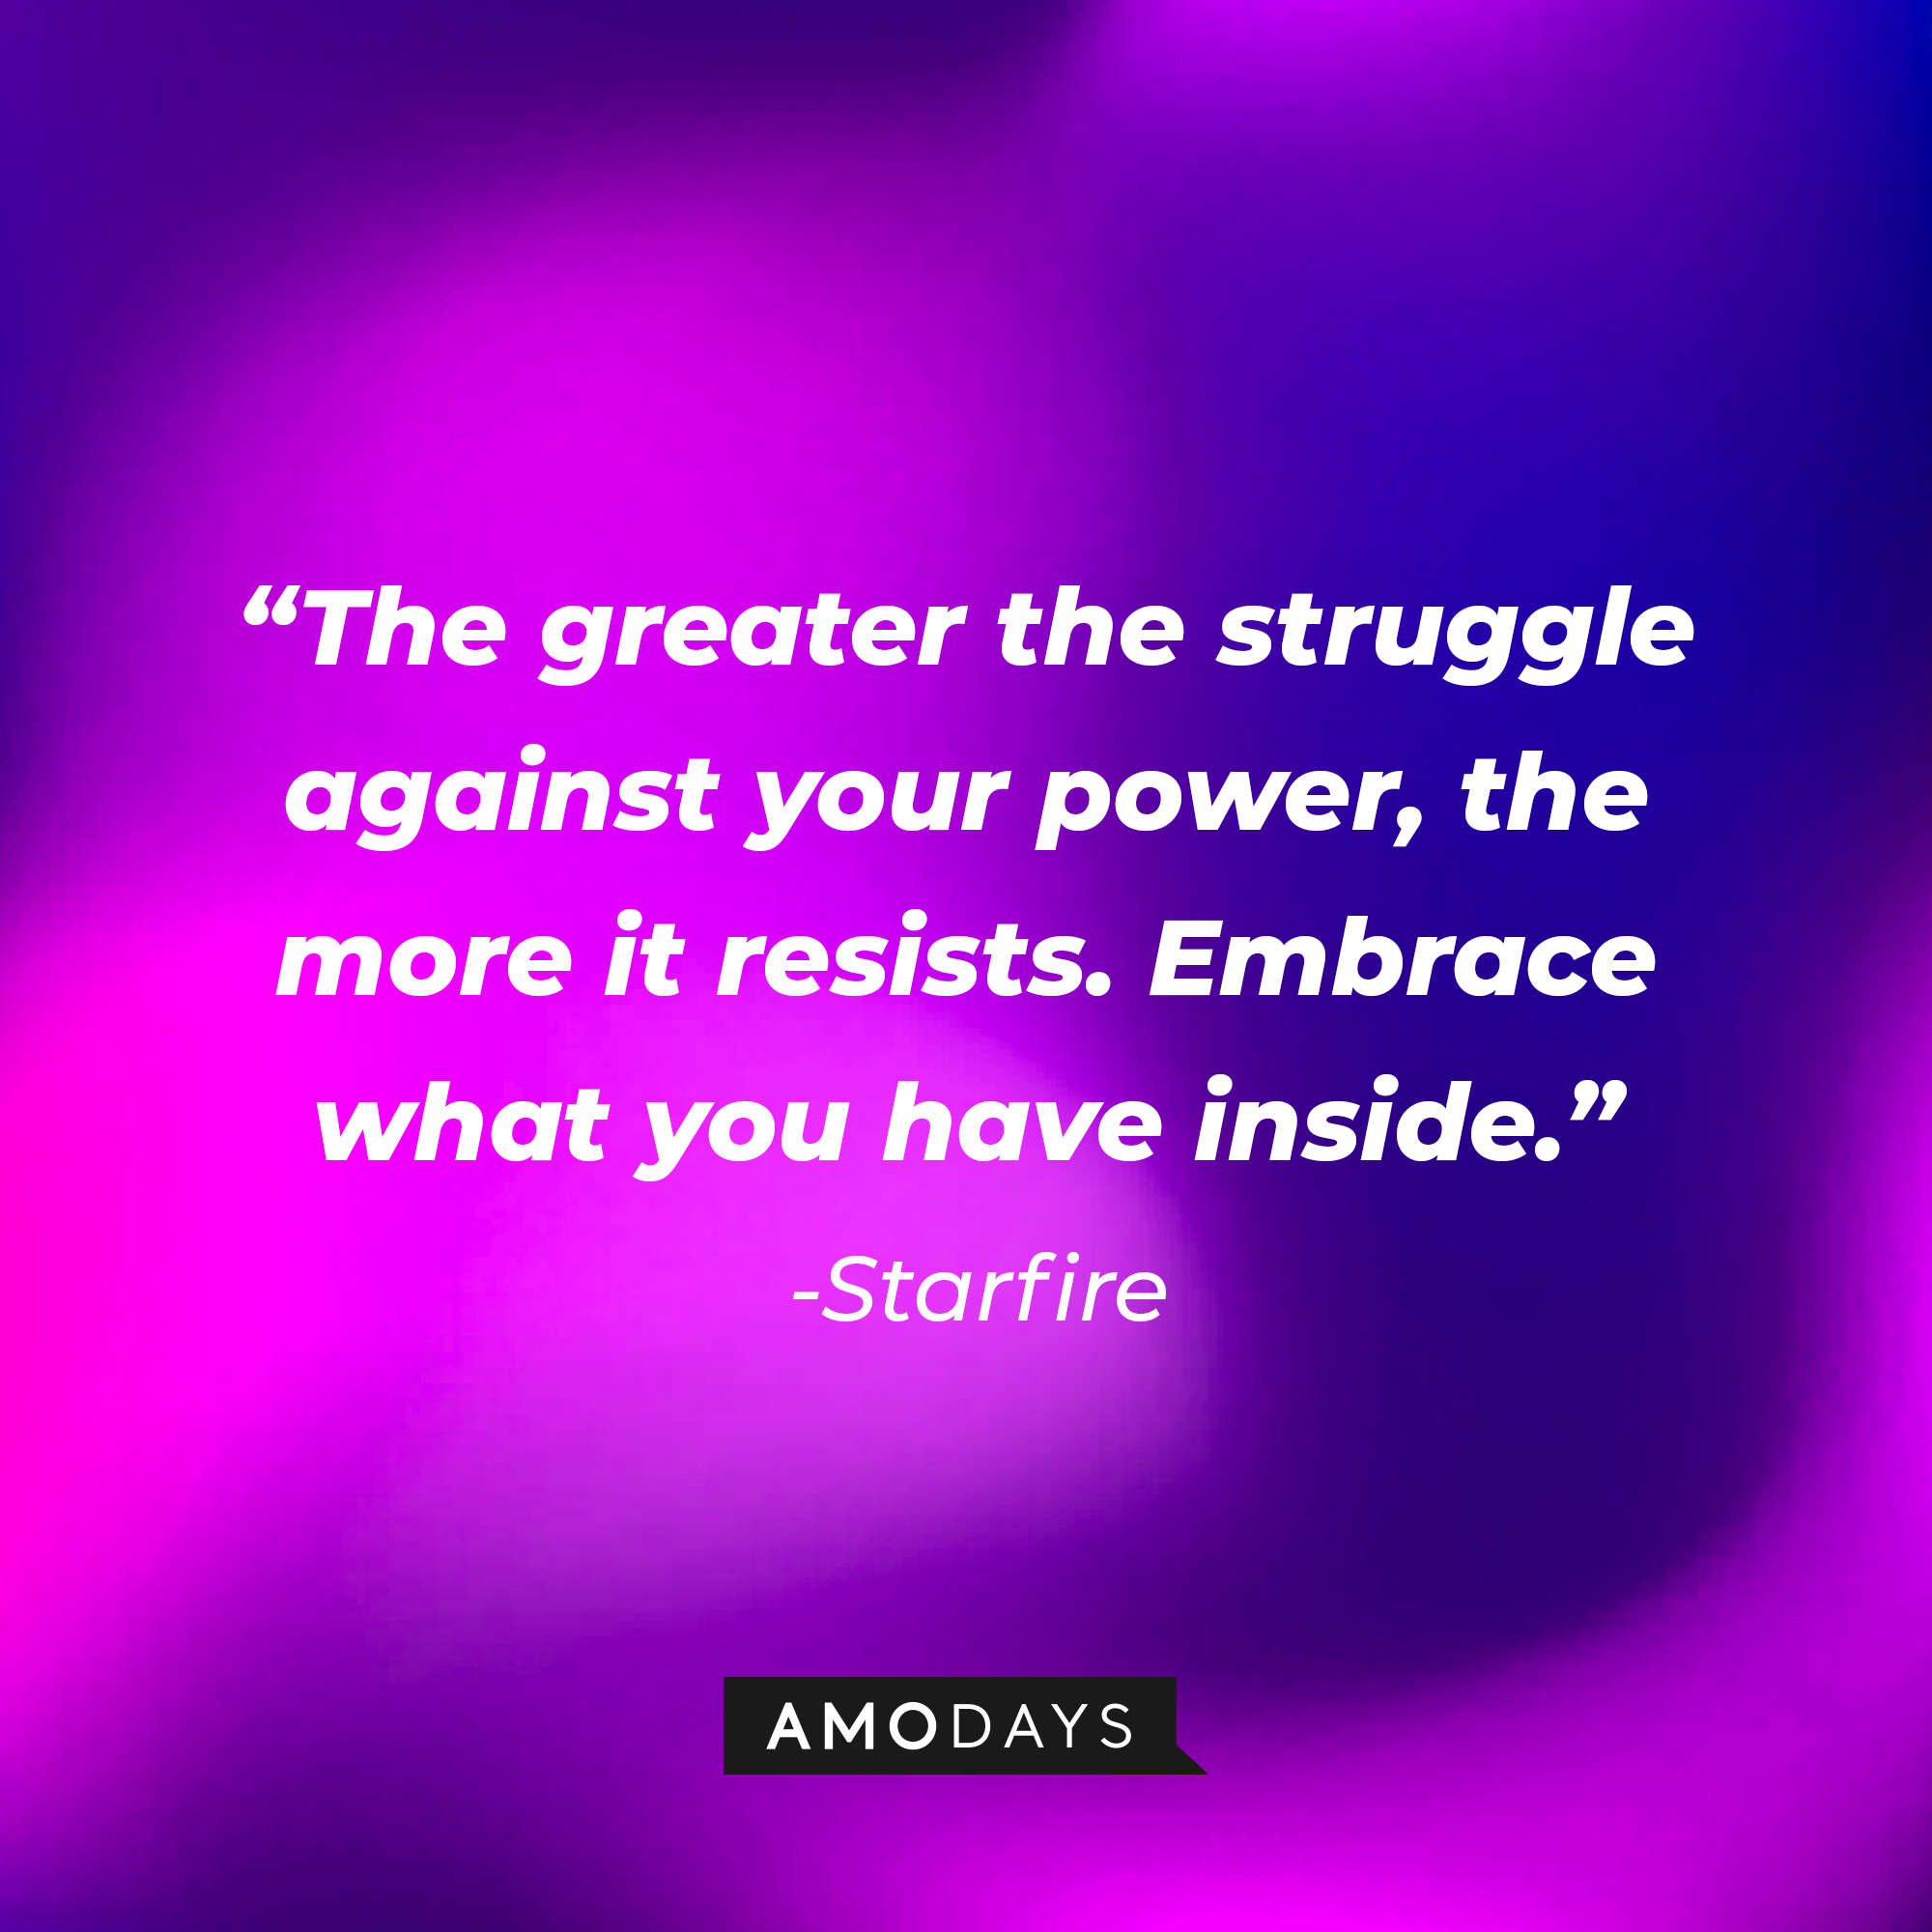 Starfire’s quote: "The greater the struggle against your power, the more it resists. Embrace what you have inside." | Source: AmoDays